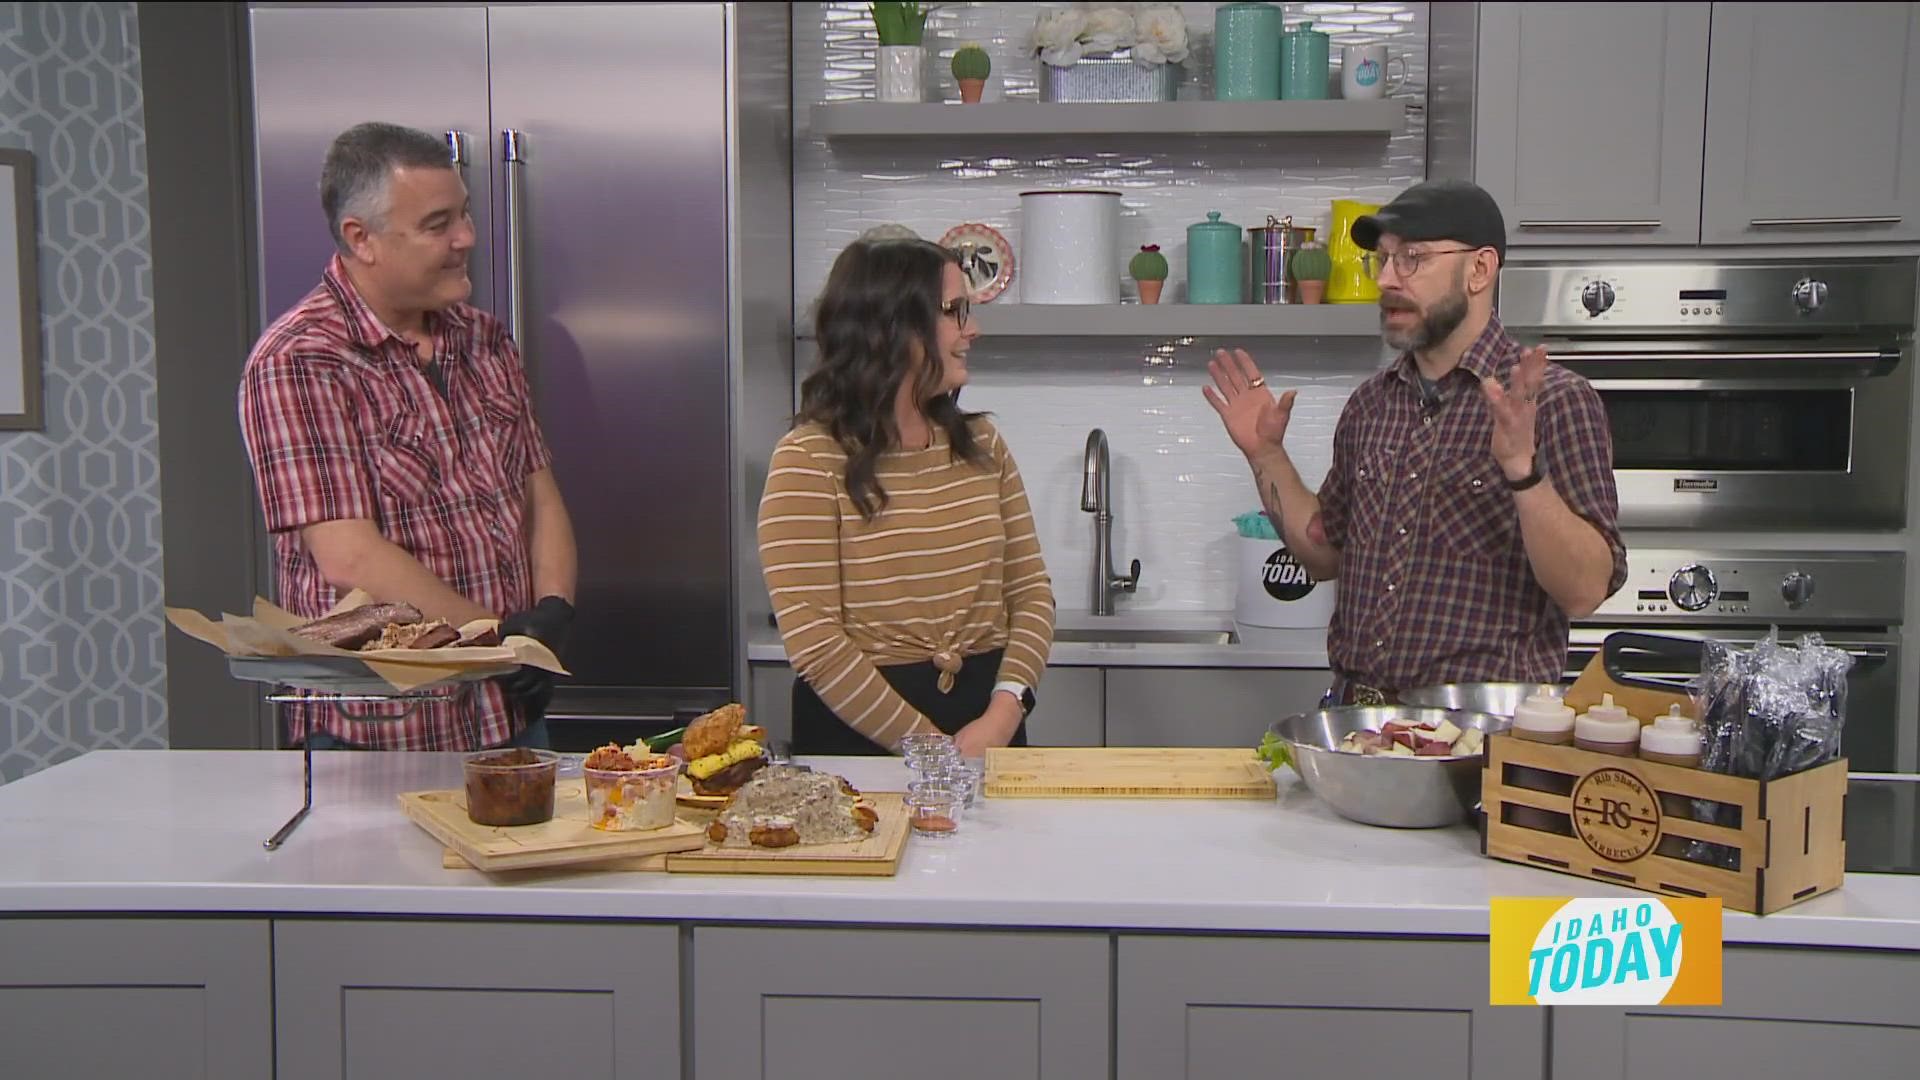 Rib Shack stops by the studio to show some tasty eats.